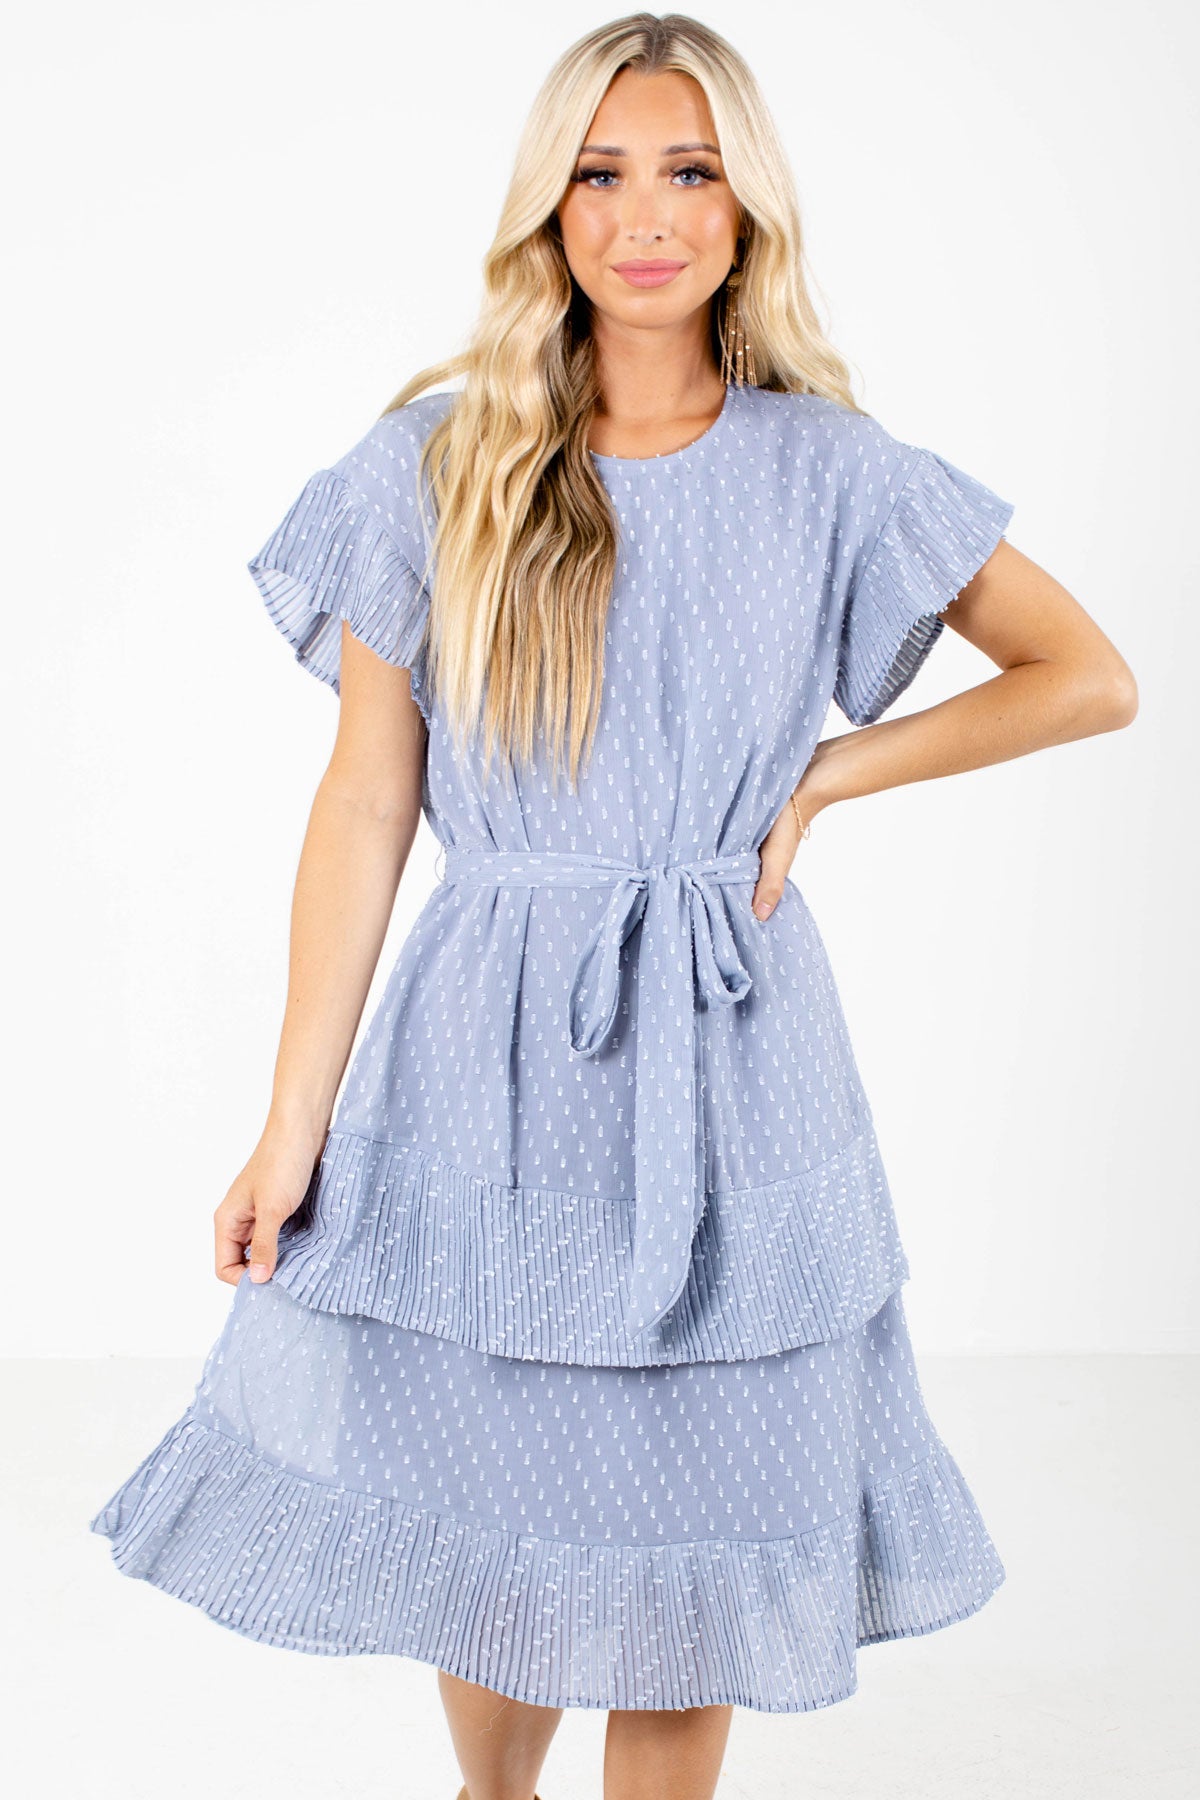 The Sweetest Thing Knee-Length Dress | Boutique Dress - Bella Ella Boutique